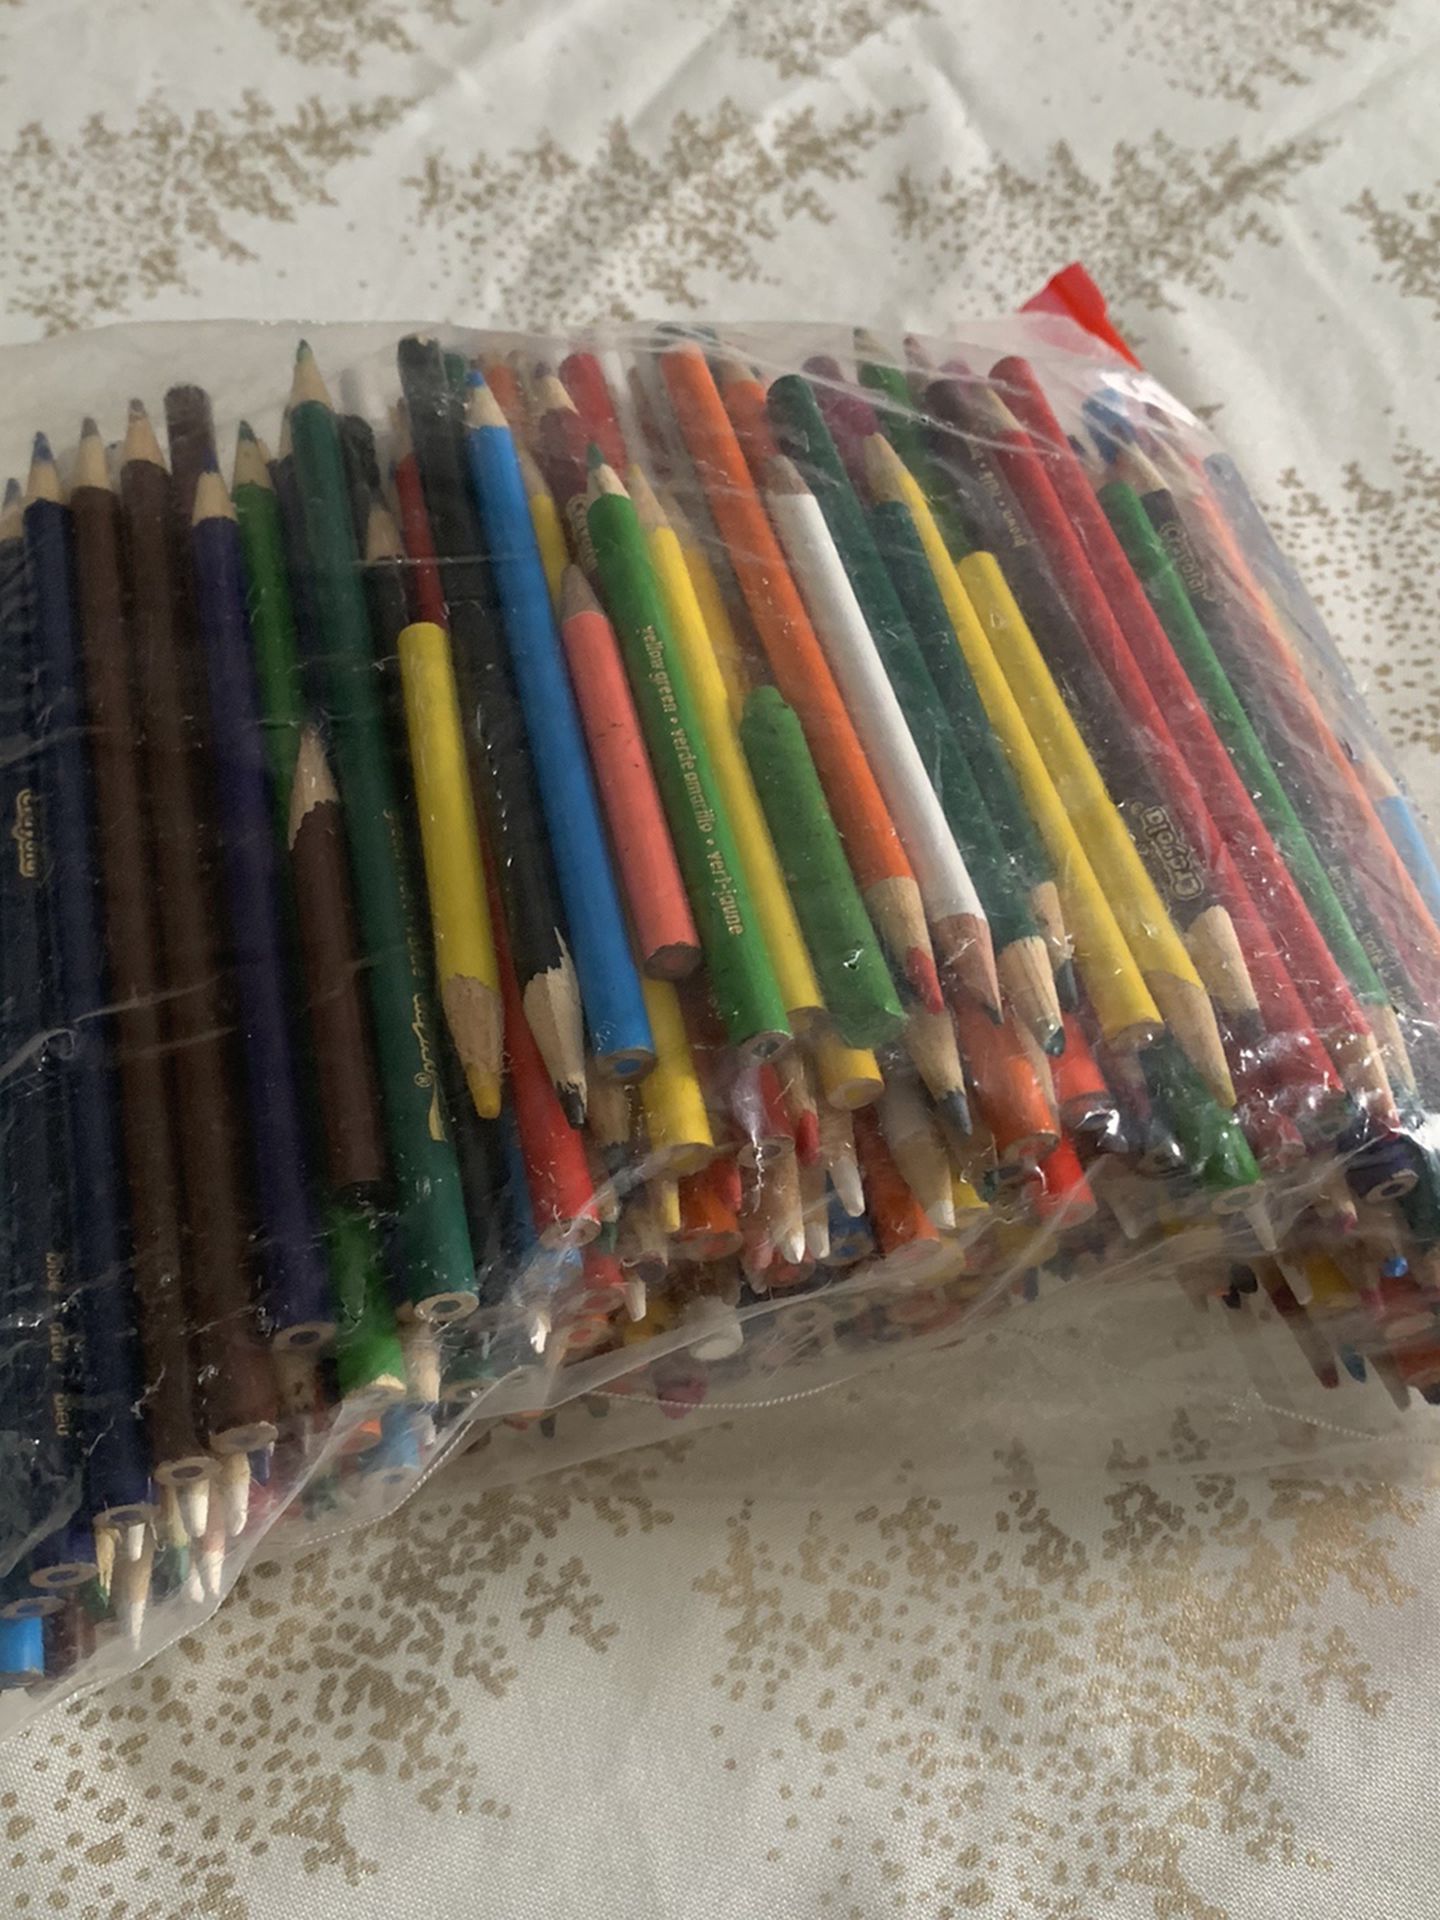 Free gallon size bag of colored pencils for a teacher